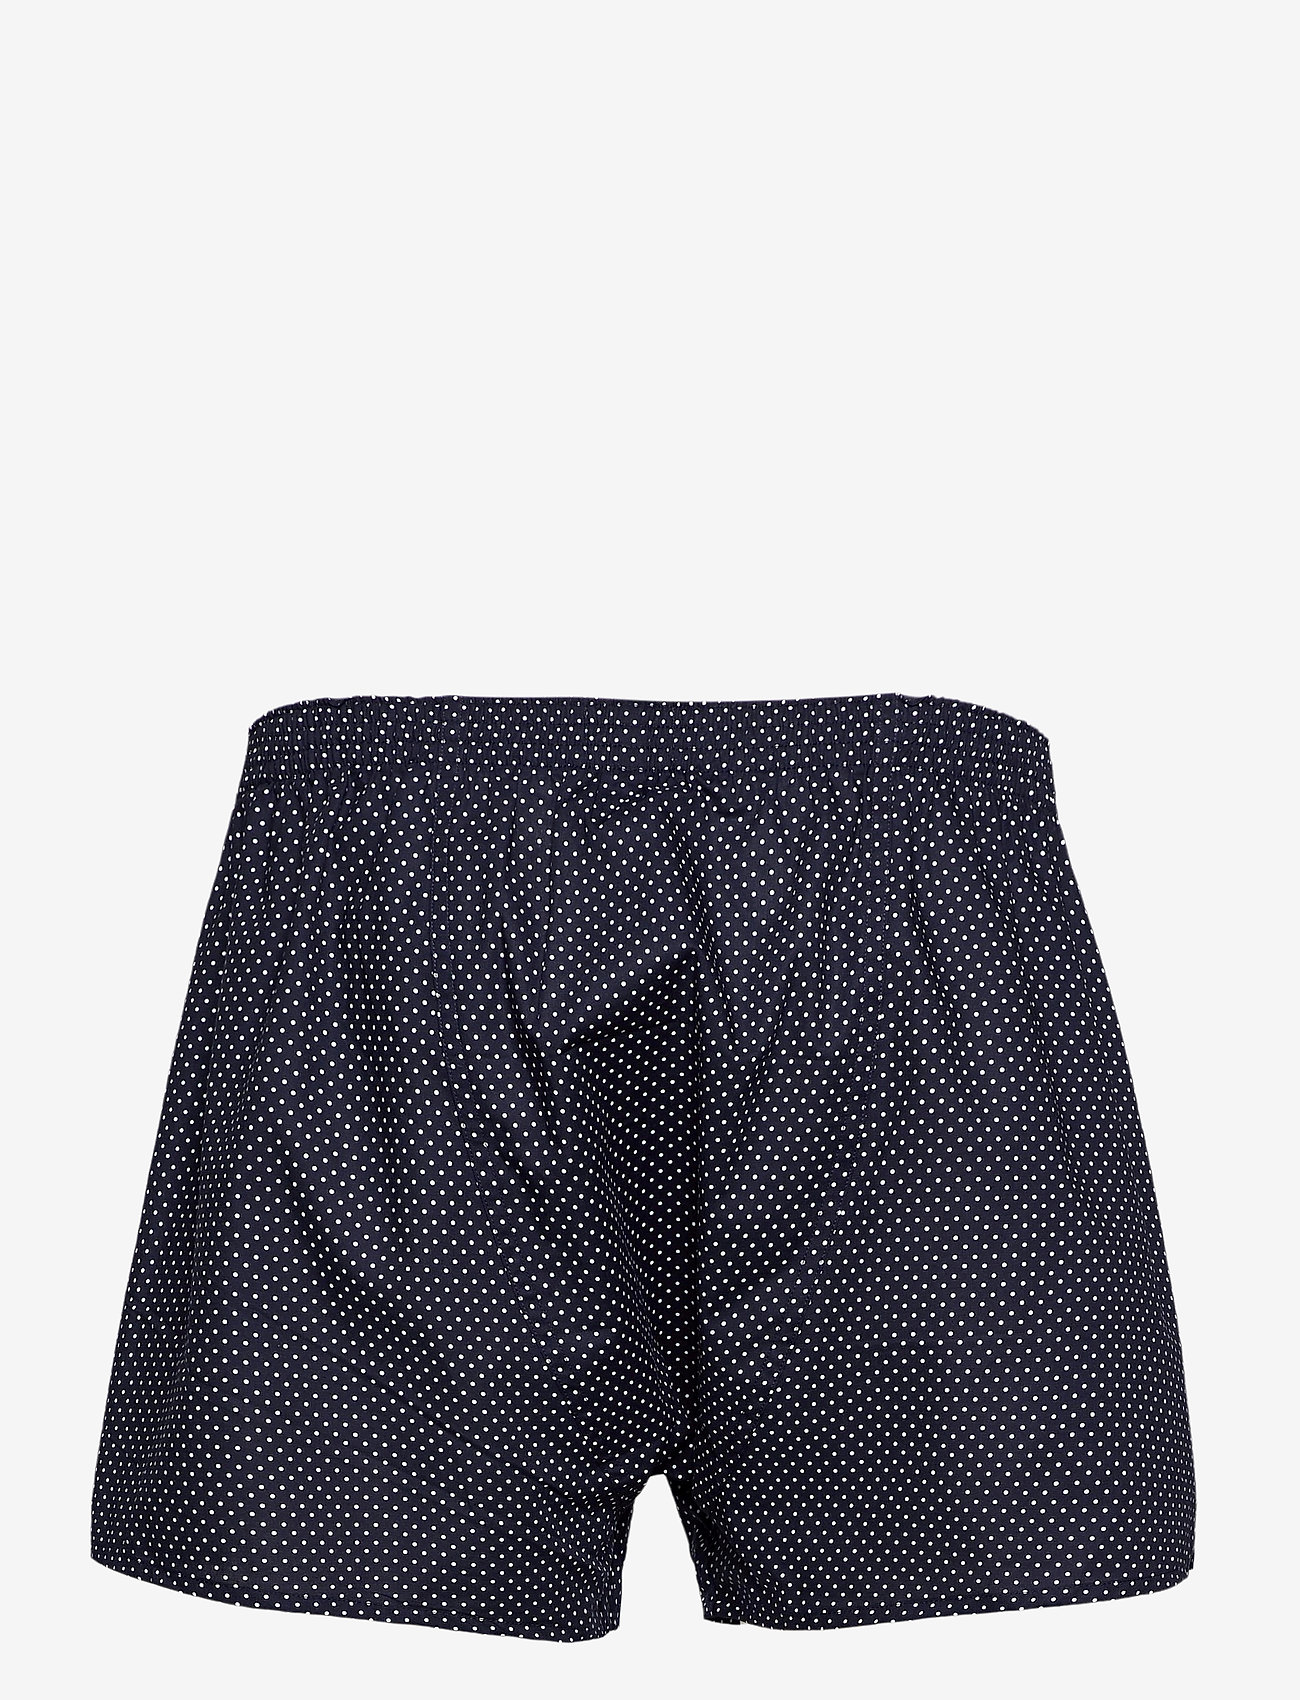 Jockey - Boxer woven 1-p - lowest prices - navy - 1